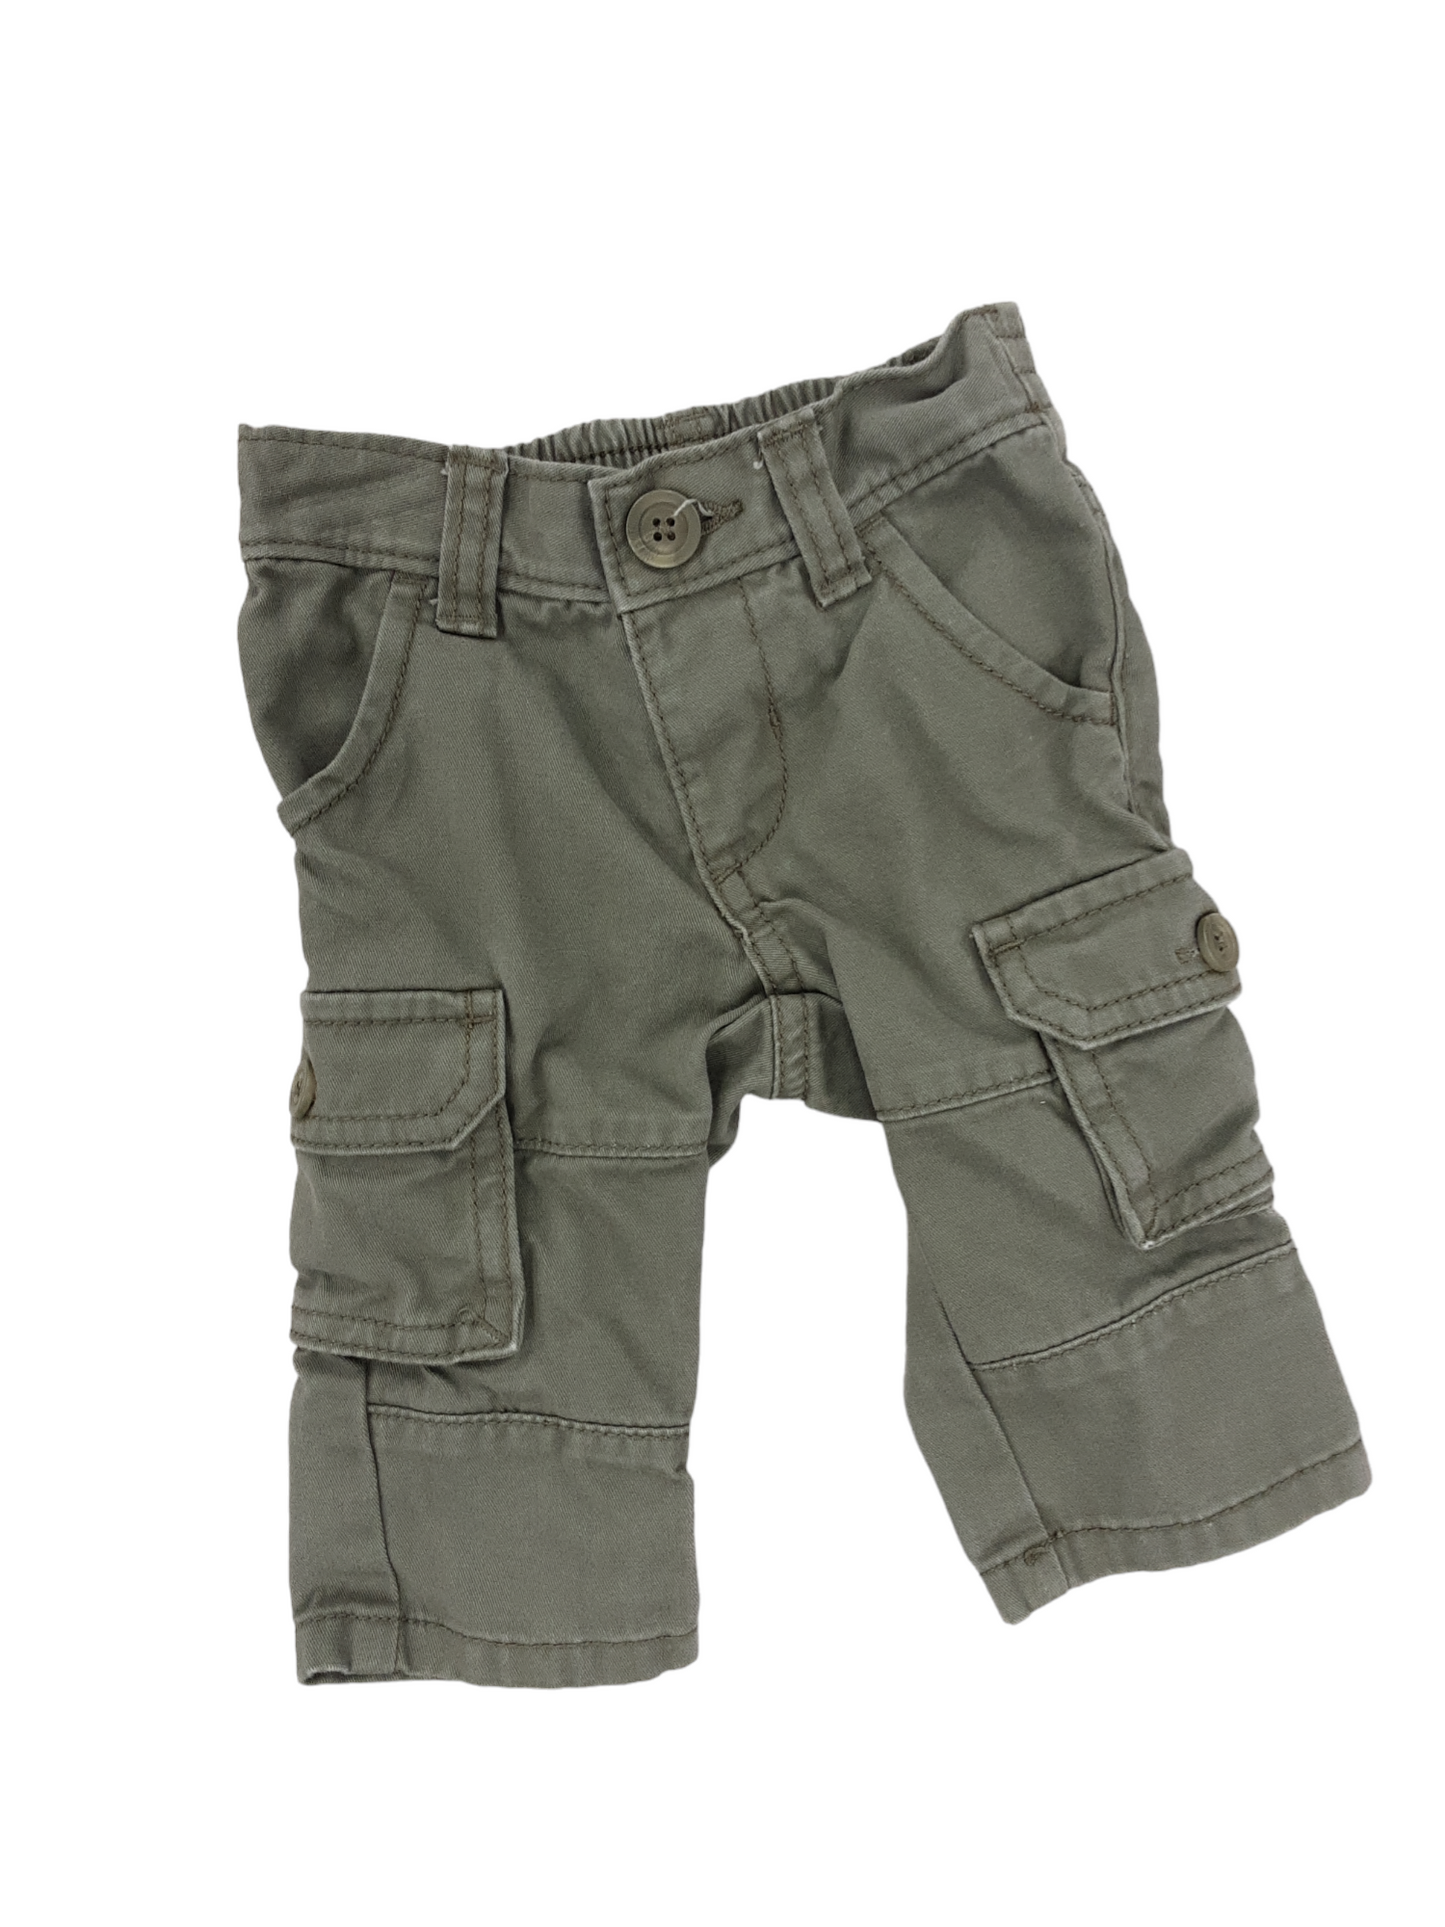 Olive green size 3 to 6 month pants